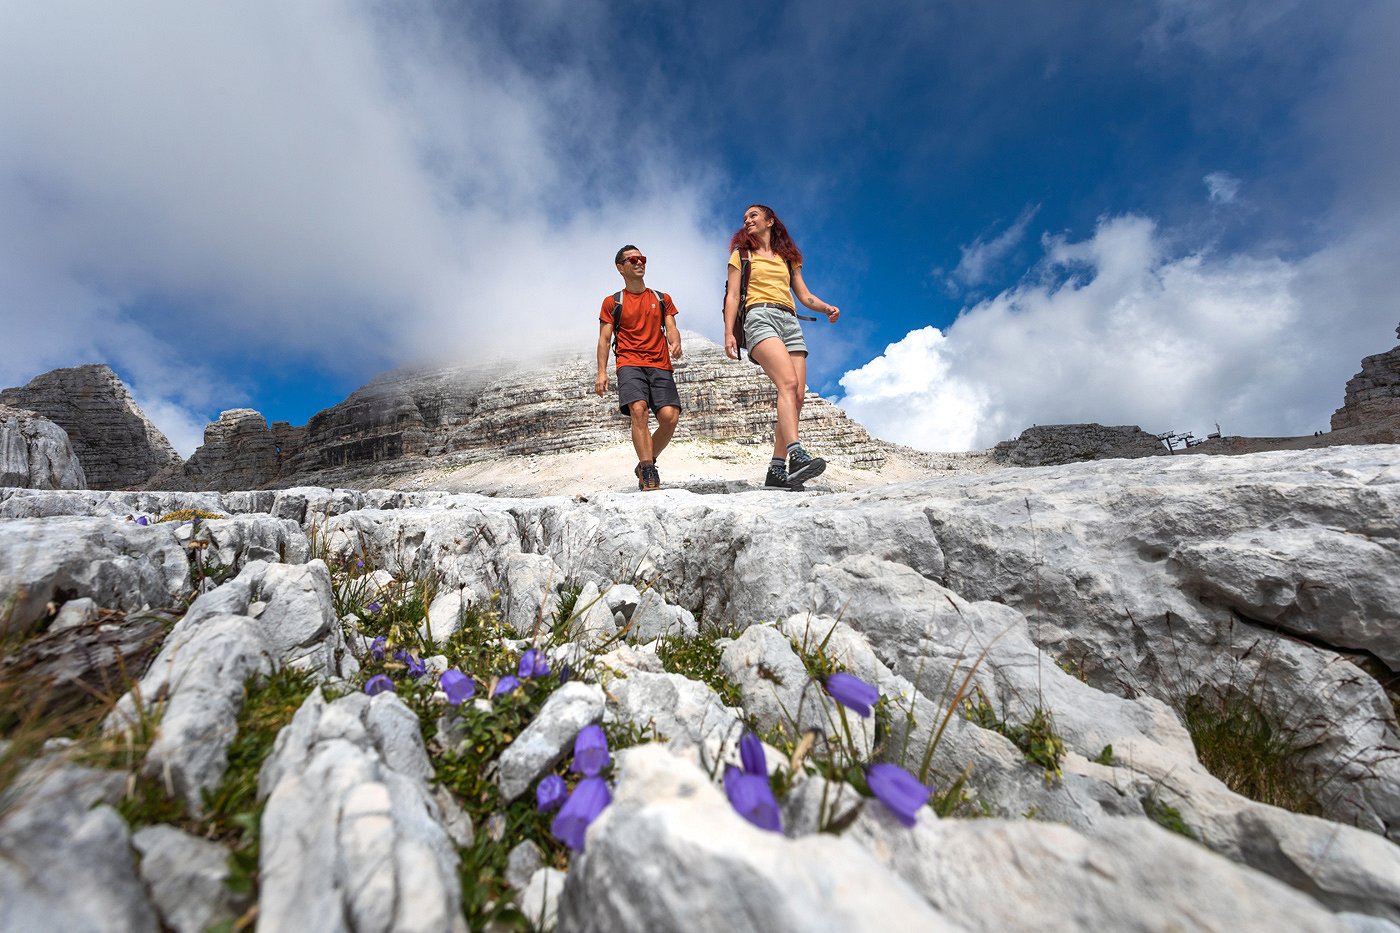 Hikers enjoy the mountains in a bed of flowers